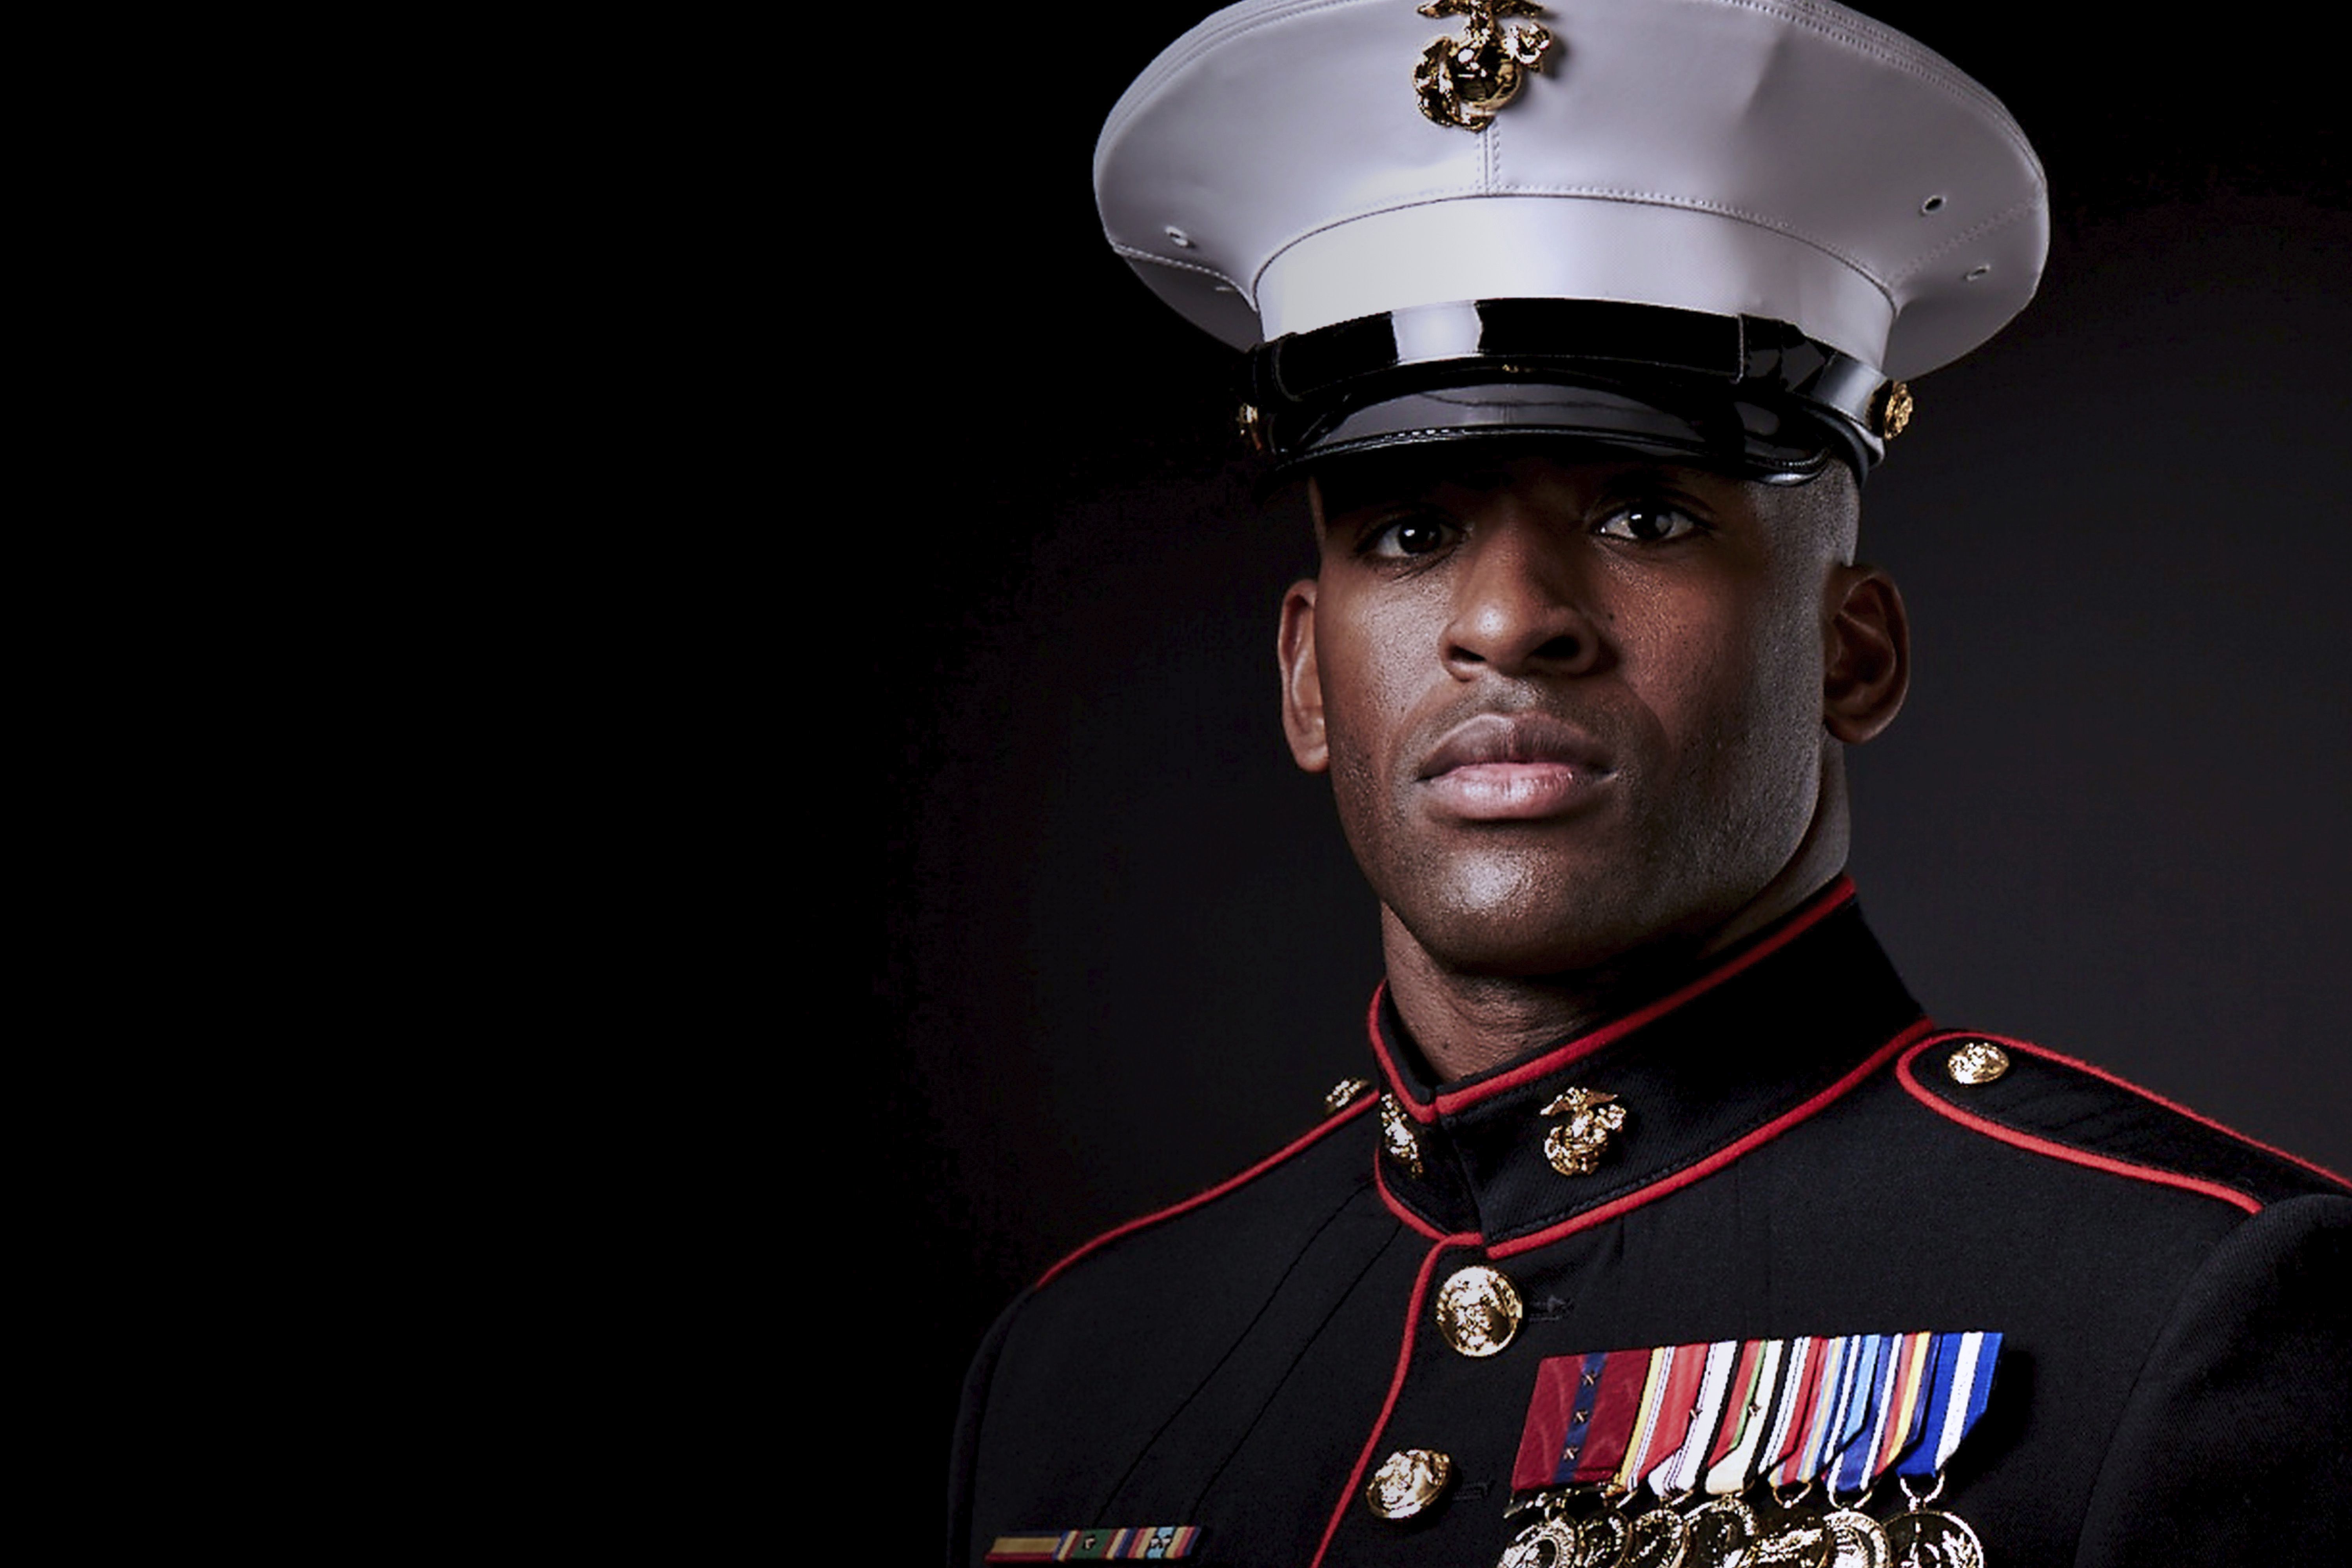 is being a marine officer worth it